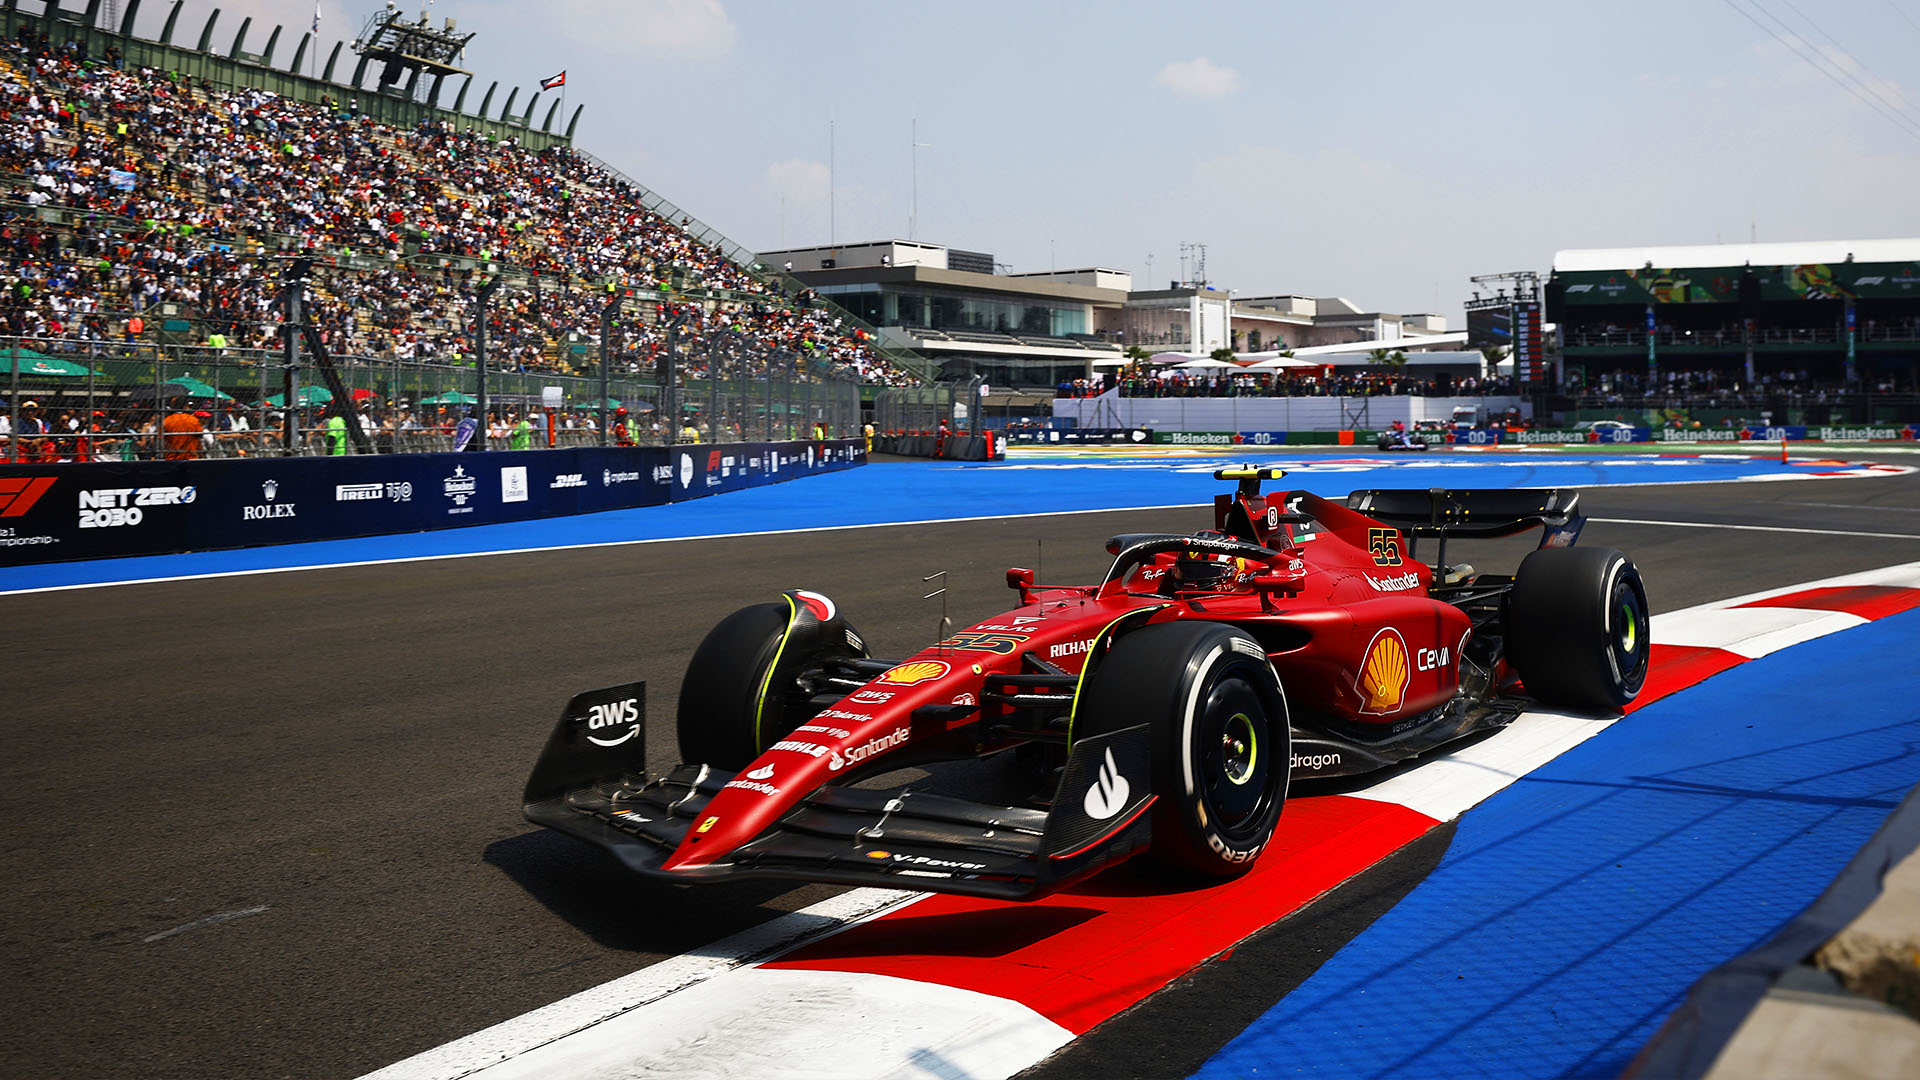 FP1 report and highlights from the 2022 Mexico City Grand Prix Sainz